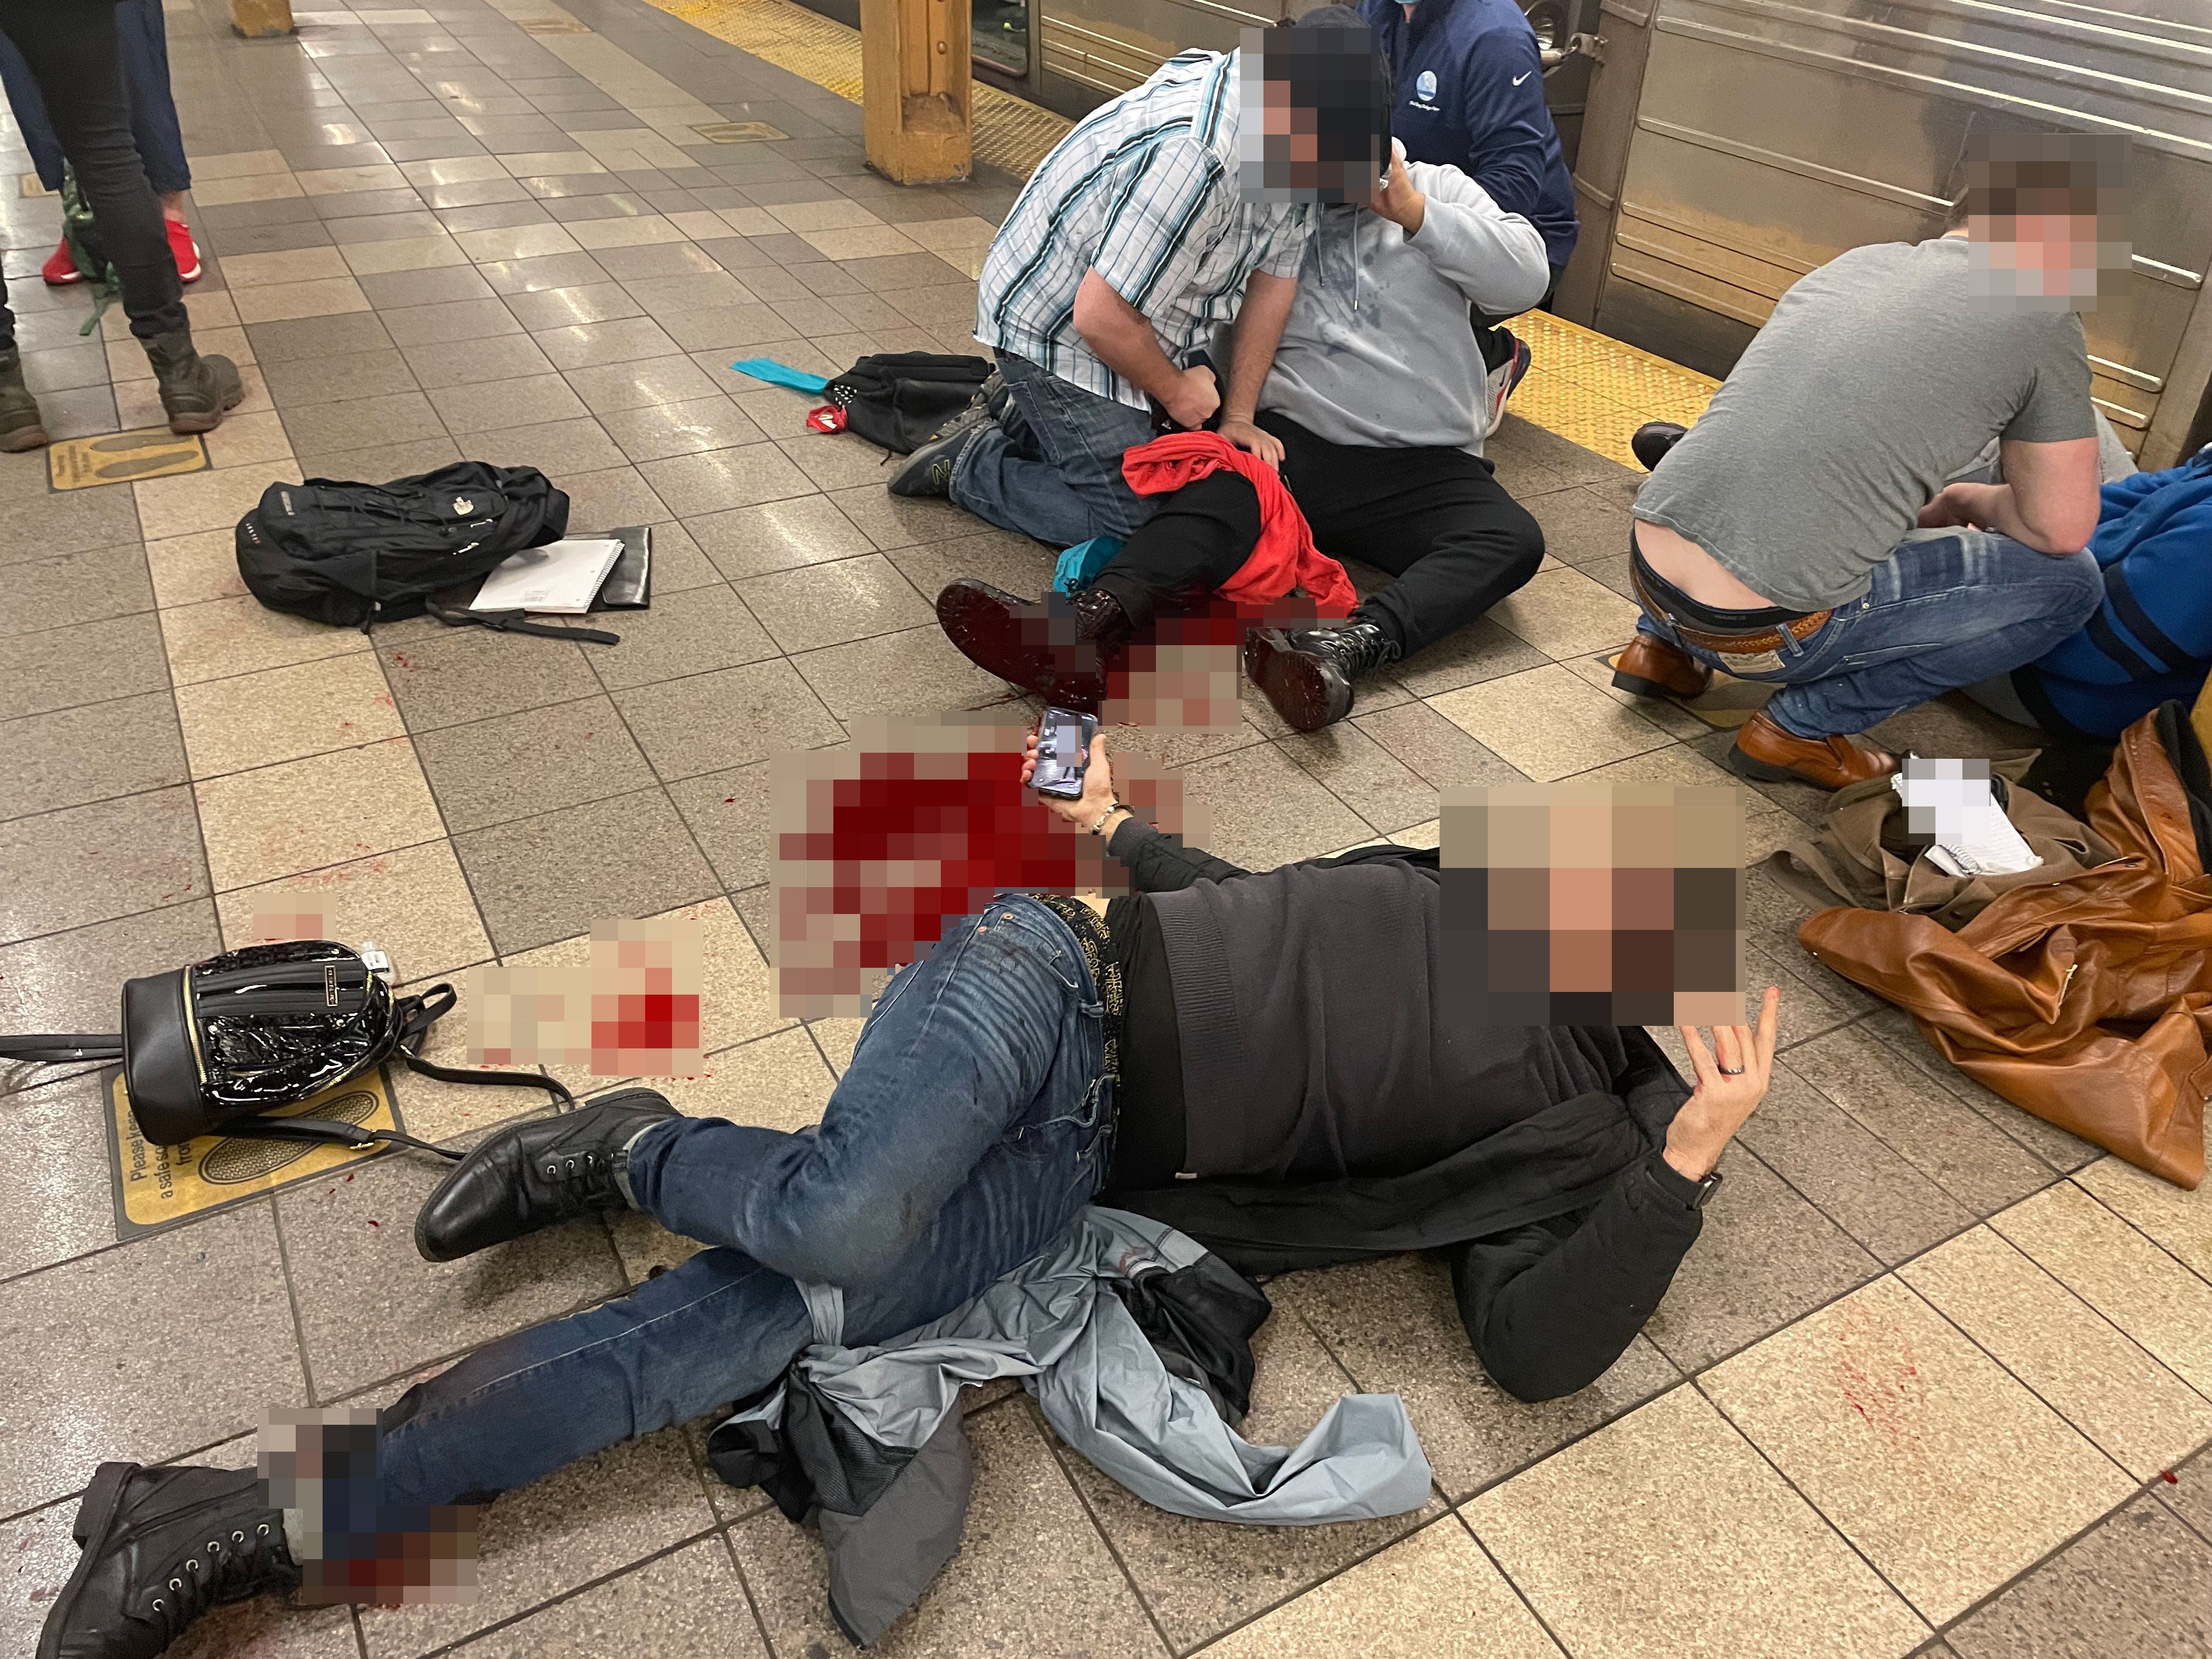 Victims lay on the ground after a shooting at Brooklyn’s 36th Street subway station on 12 April